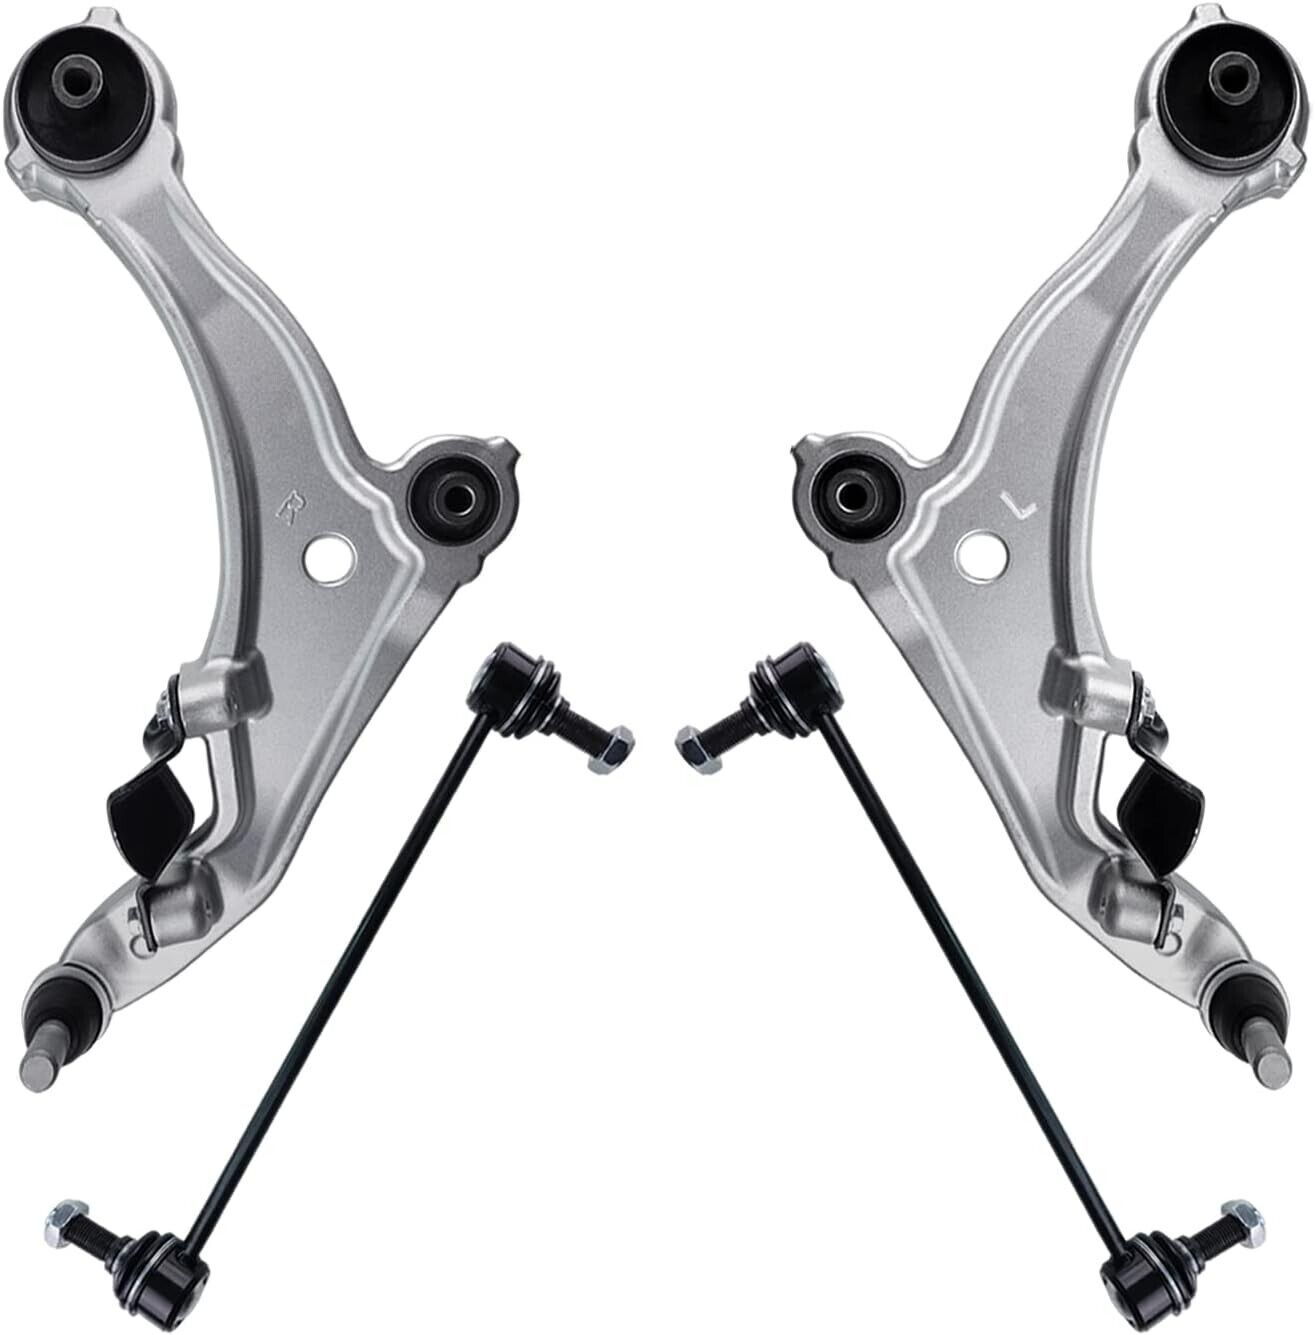 SVENSTAG Control Arm Kit With Sway Bar Links for 2009-2014 Nissan Maxima - 4Pcs